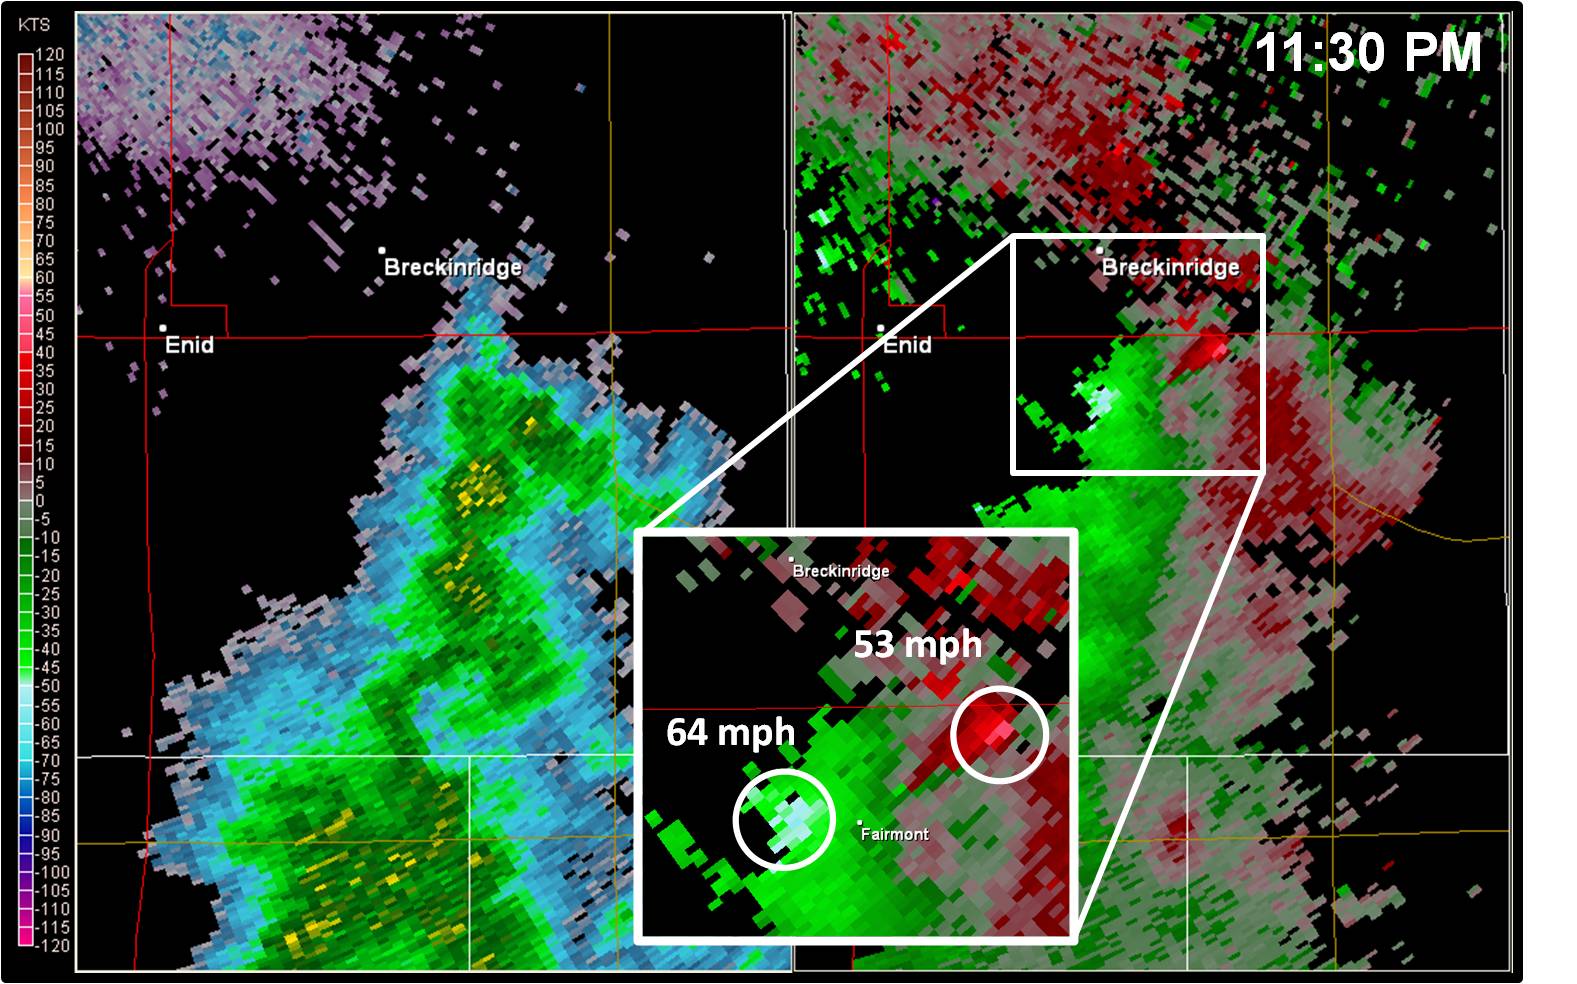 Radar reflectivity and radial velocity from Vance AFB